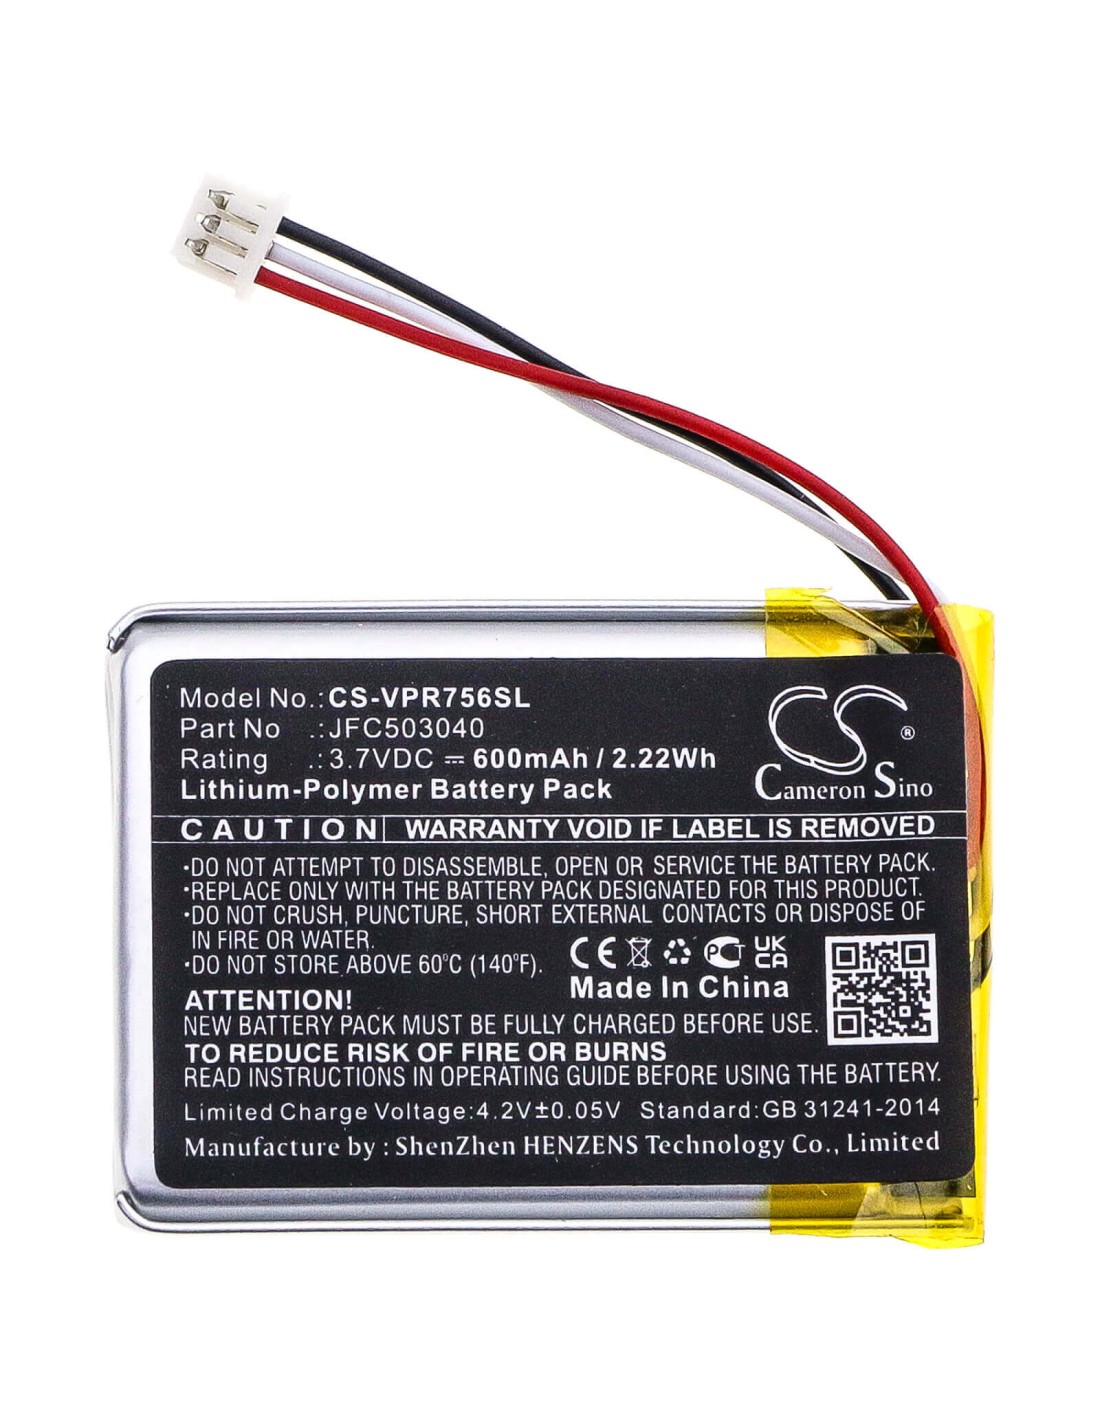 Battery for Clifford, 7541x 3.7V, 600mAh - 2.22Wh